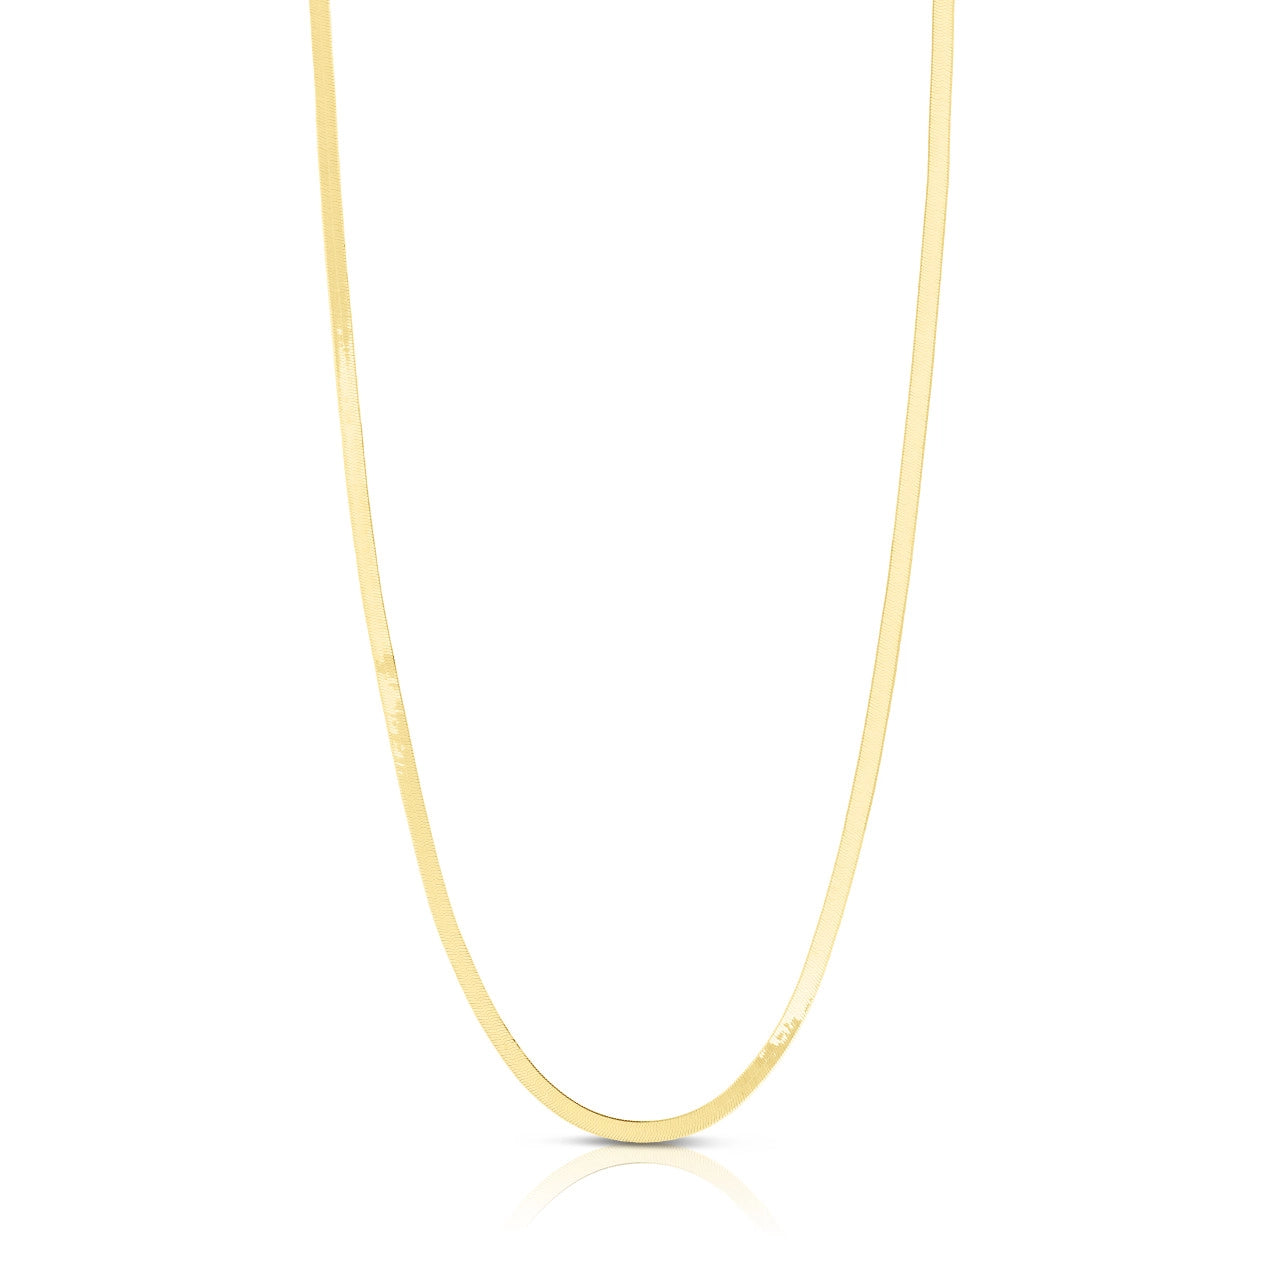 Herringbone Chain Necklace 2.8mm in Yellow Gold